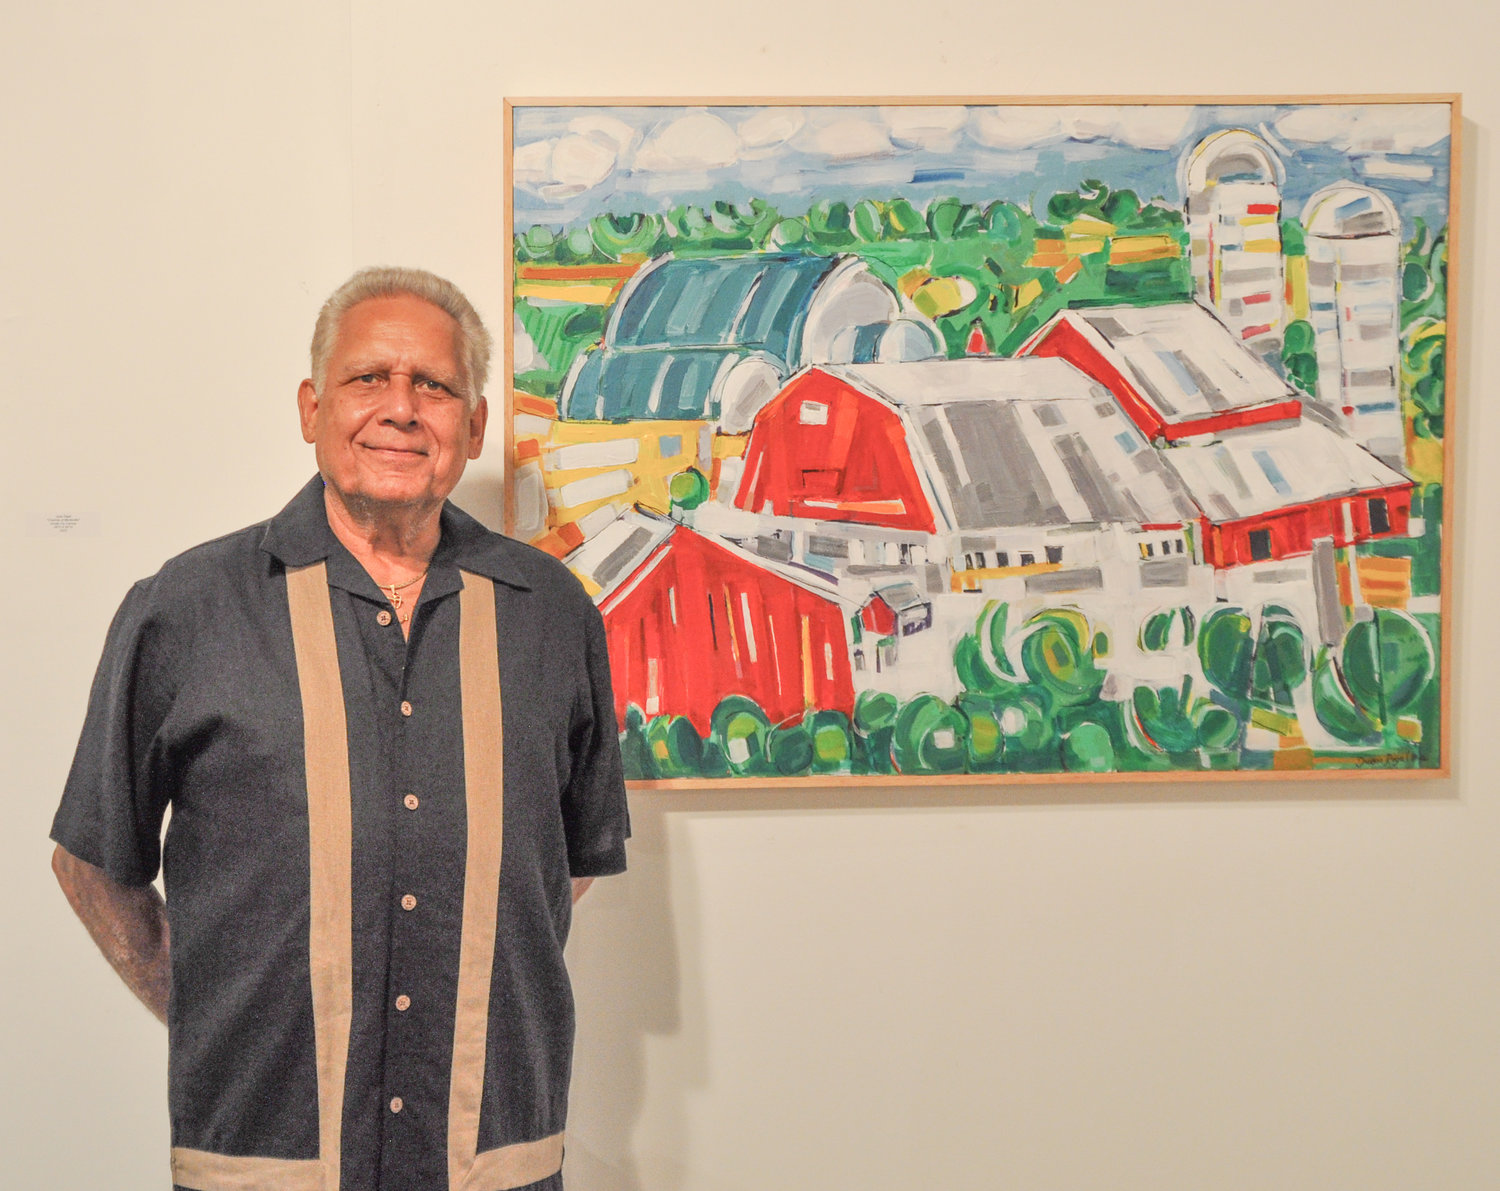 “Change is a good thing,” Nutshell Arts Center's Juan Rigal told me as I perused paintings created by many well-known local artists; his own work is pictured here. "Who knows what the future will bring?"